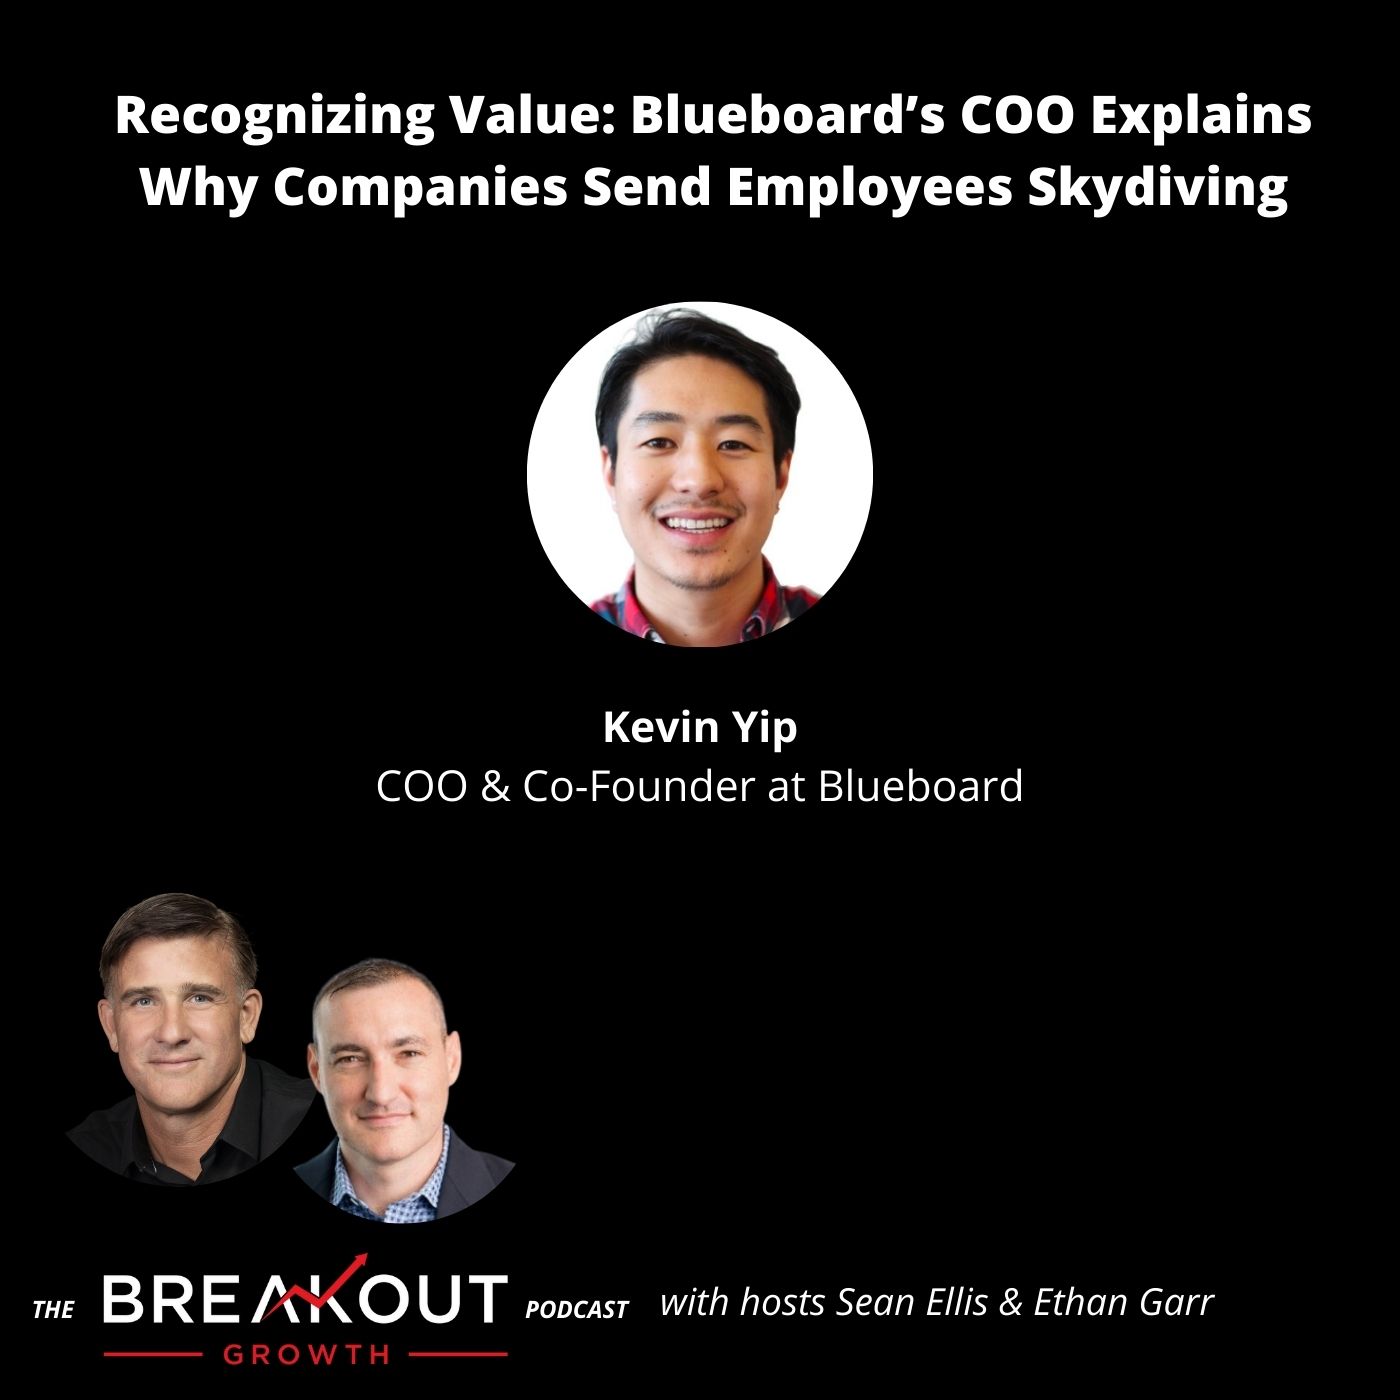 Recognizing Value: Blueboard’s COO Explains Why Companies Send Employees Skydiving